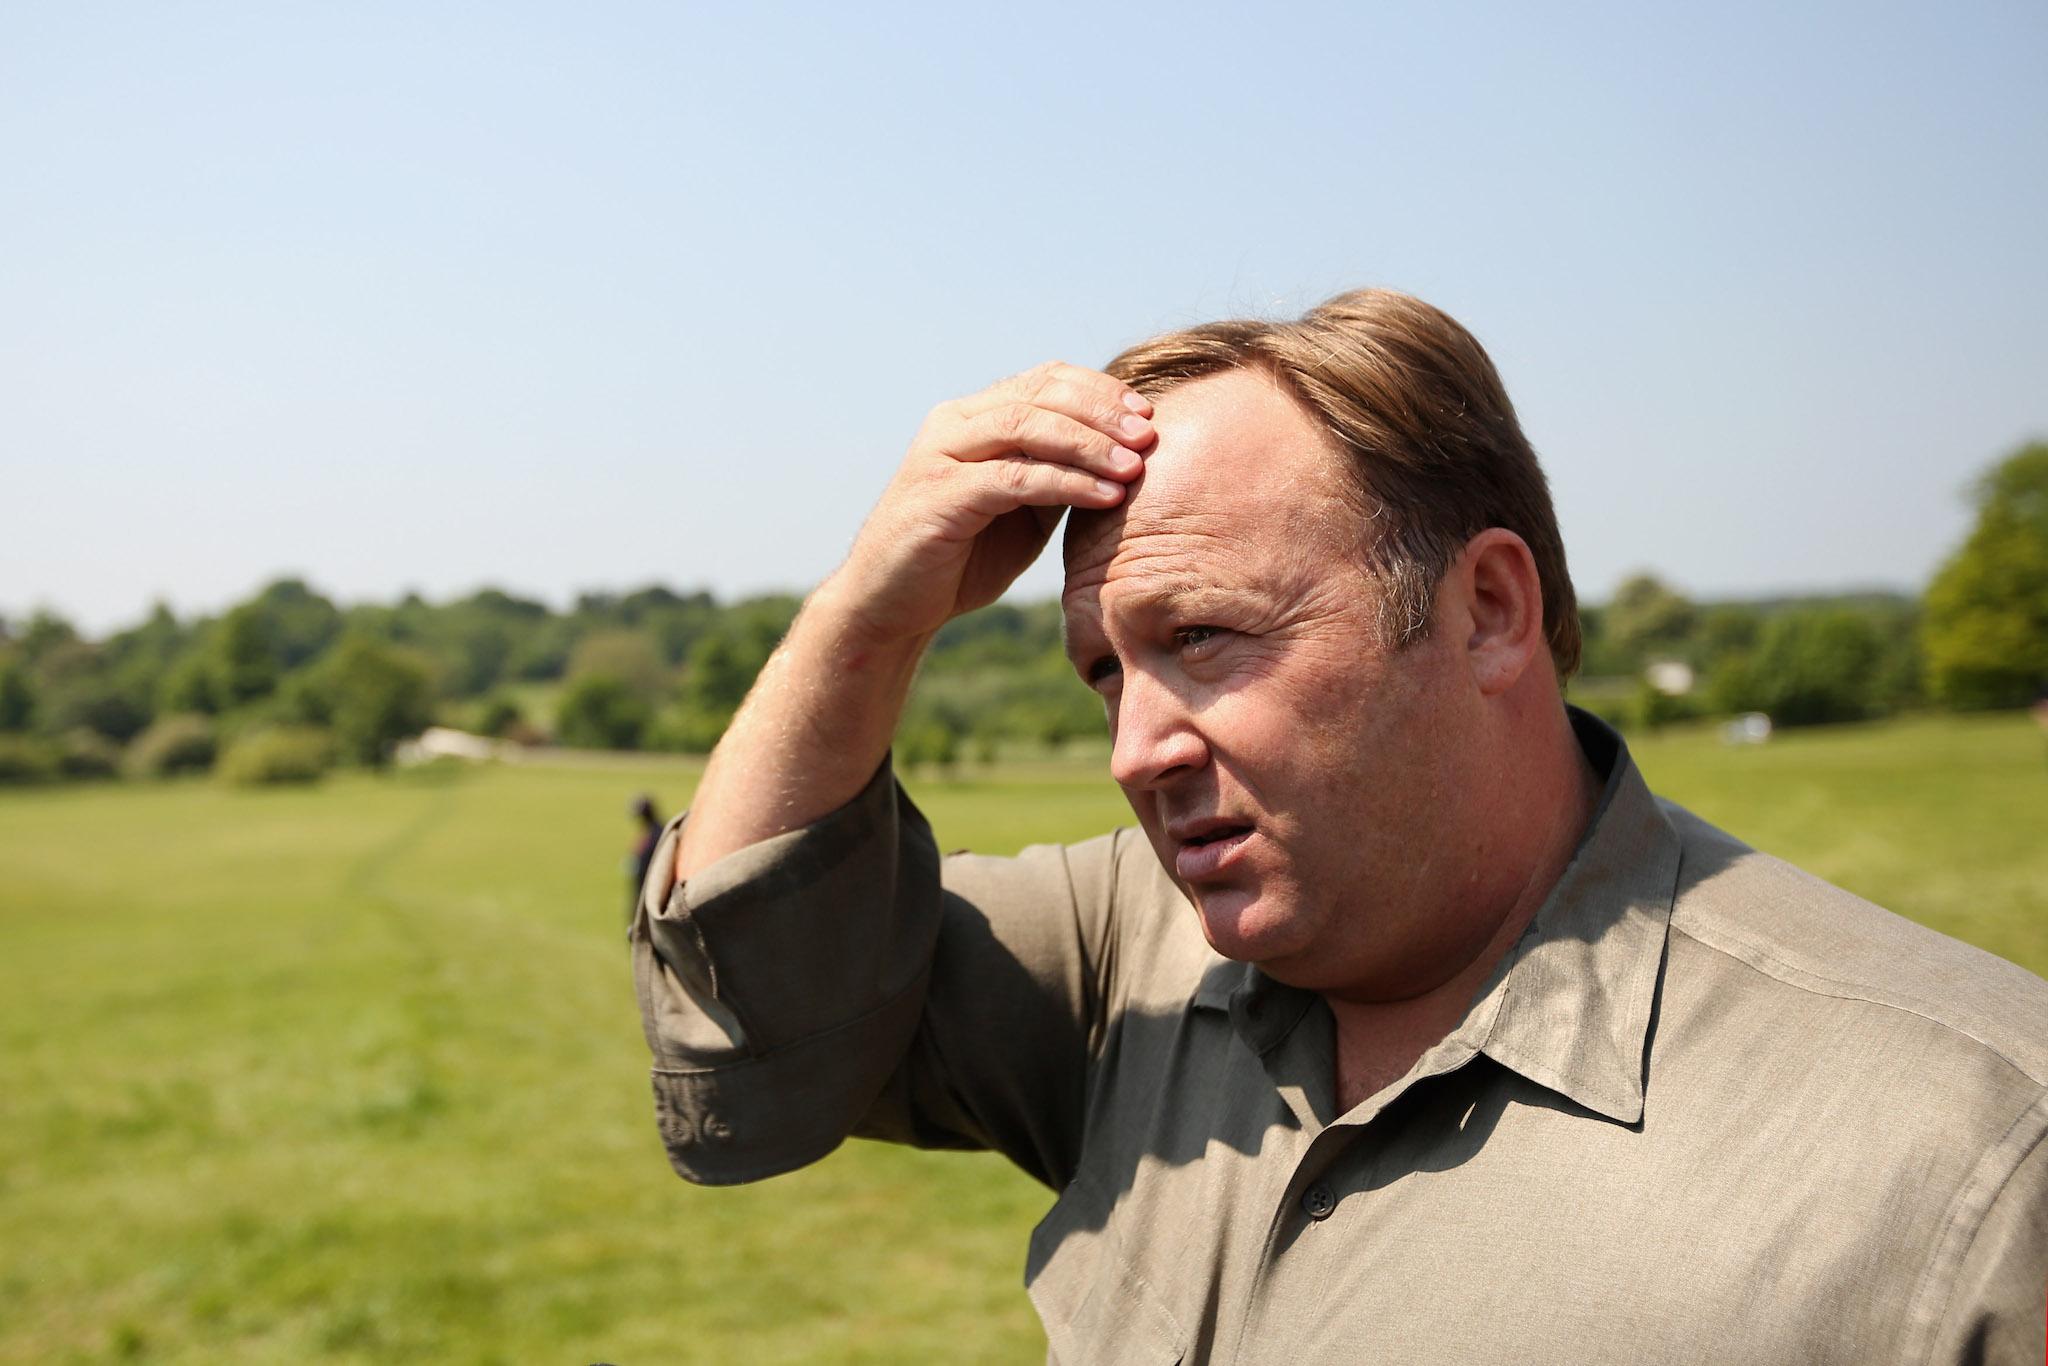 Alex Jones, an American radio host, author and conspiracy theorist, addresses media and protesters in the protester encampment outside The Grove hotel, which is hosting the annual Bilderberg conference, on June 6, 2013 in Watford, England